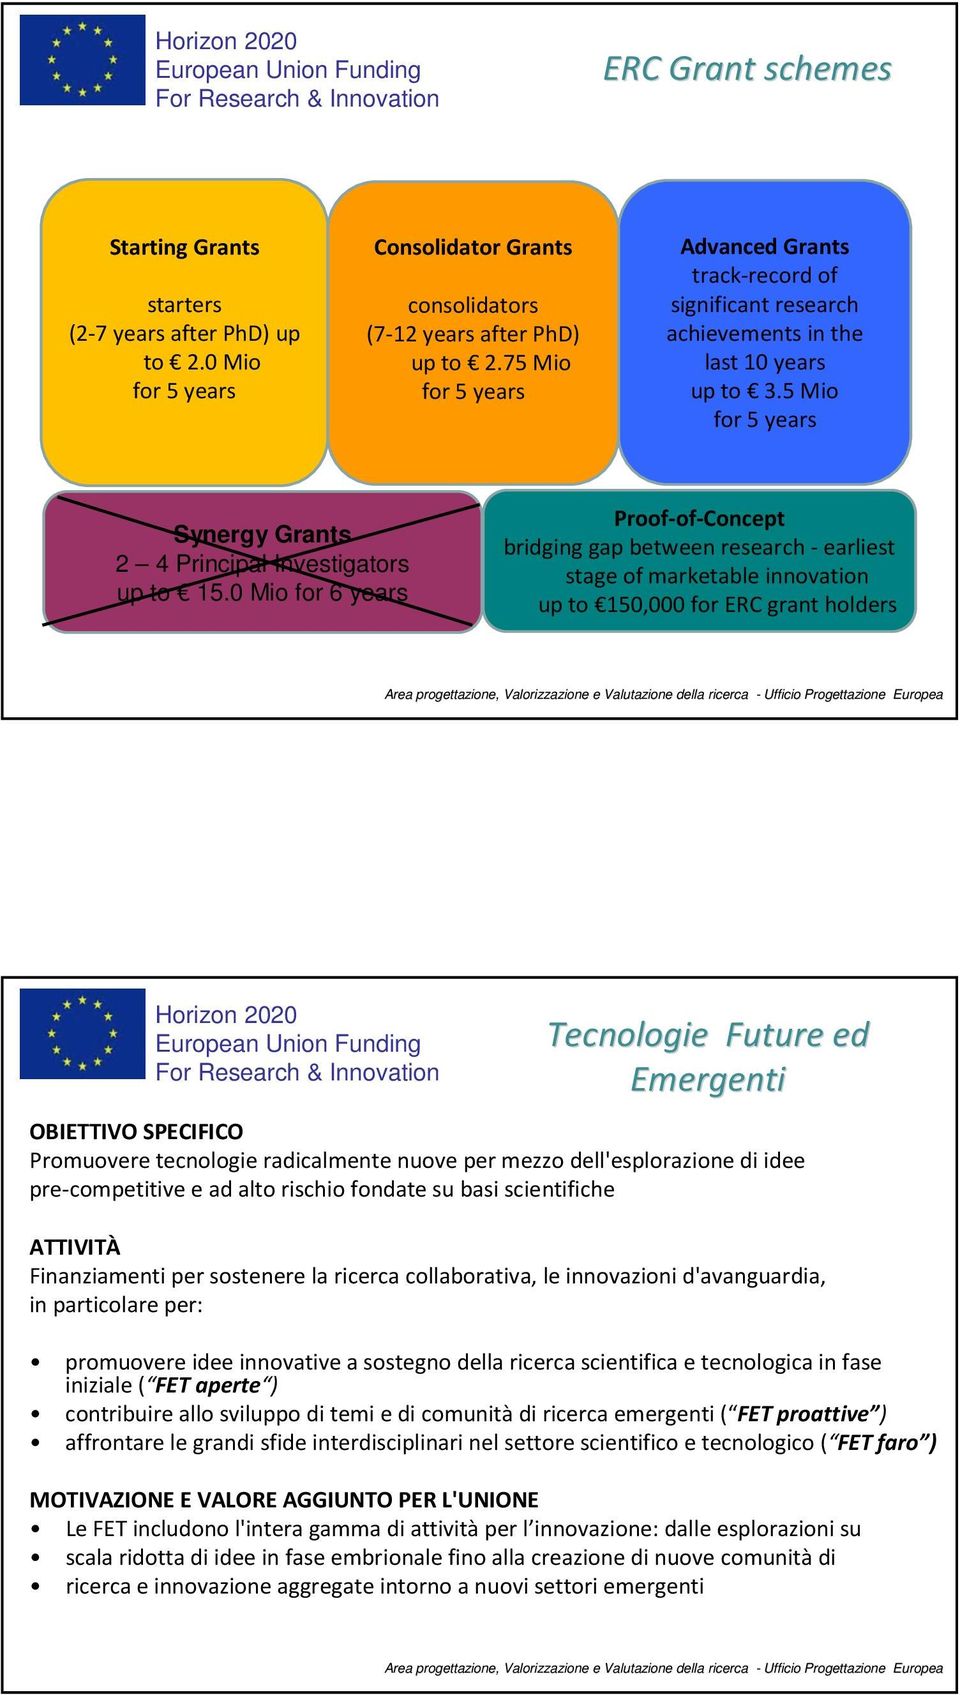 0 Mio for 6 years Proof-of-Concept bridging gap between research - earliest stage of marketable innovation up to 150,000 for ERC grant holders Tecnologie Future ed Emergenti OBIETTIVO SPECIFICO